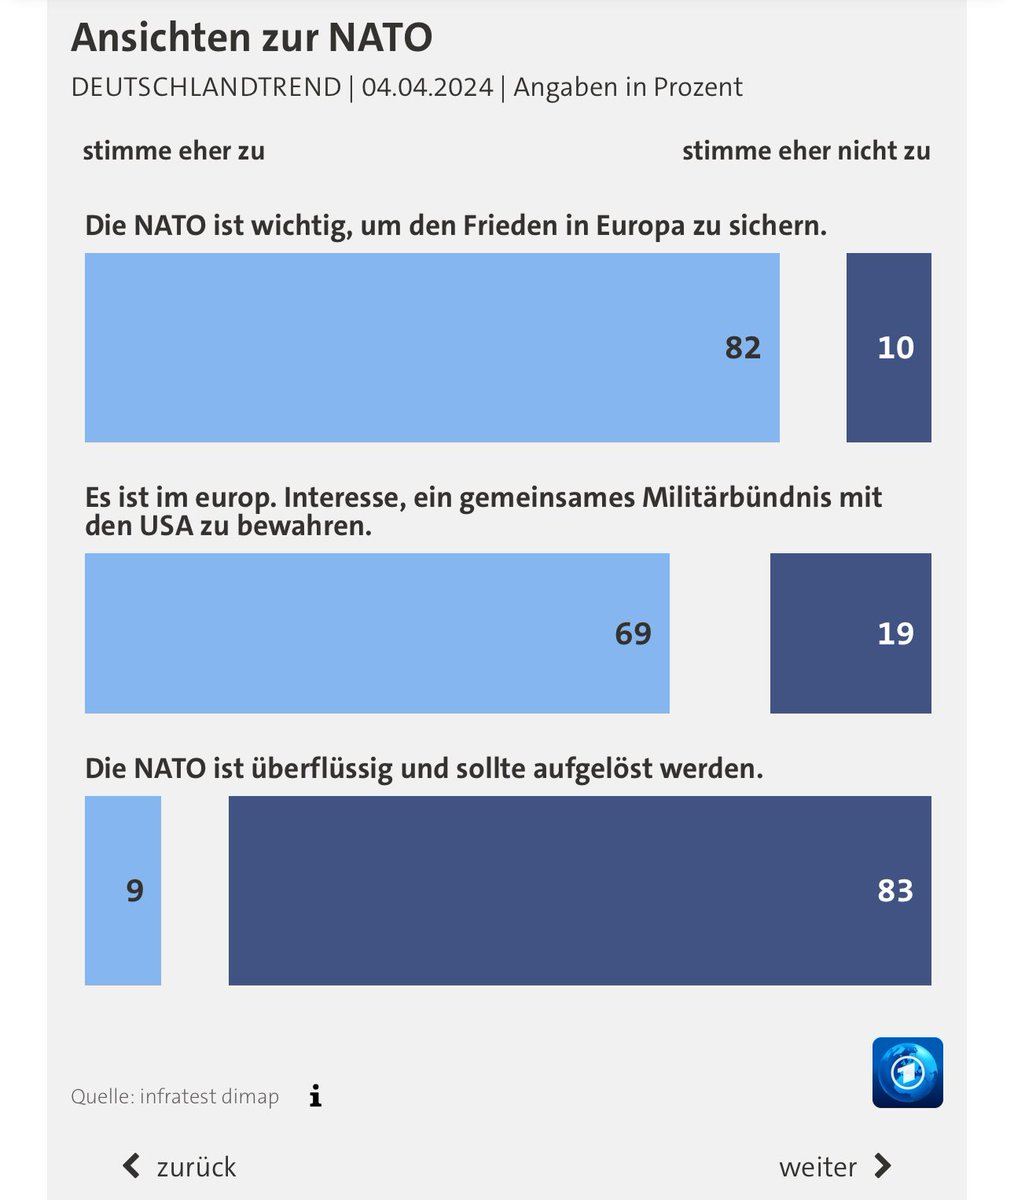 NEW: German 🇩🇪 poll shows 82 % see #NATO as important to preserve peace in Europe & 69 % realise it’s in the interest of Europeans to maintain the military alliance with the US 🇺🇸 

Via @ARDTagesschau #DeutschlandTrend 

tagesschau.de/inland/deutsch…